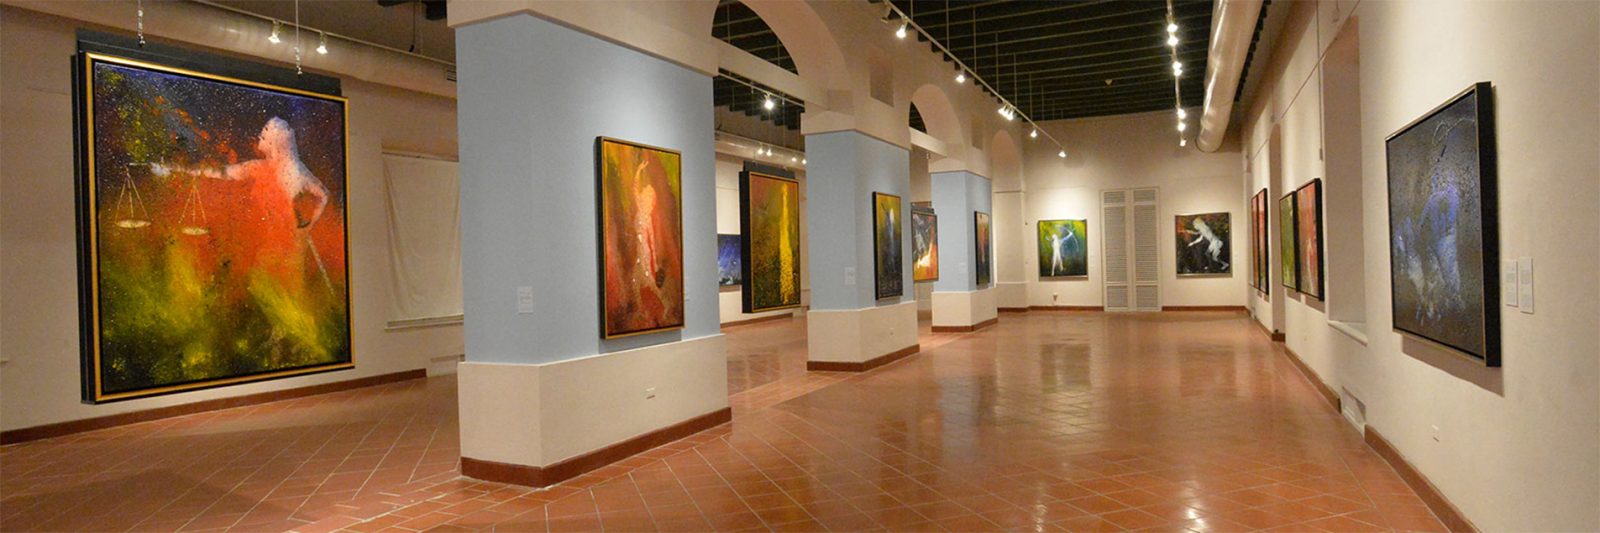 Art Museums in Puerto Rico